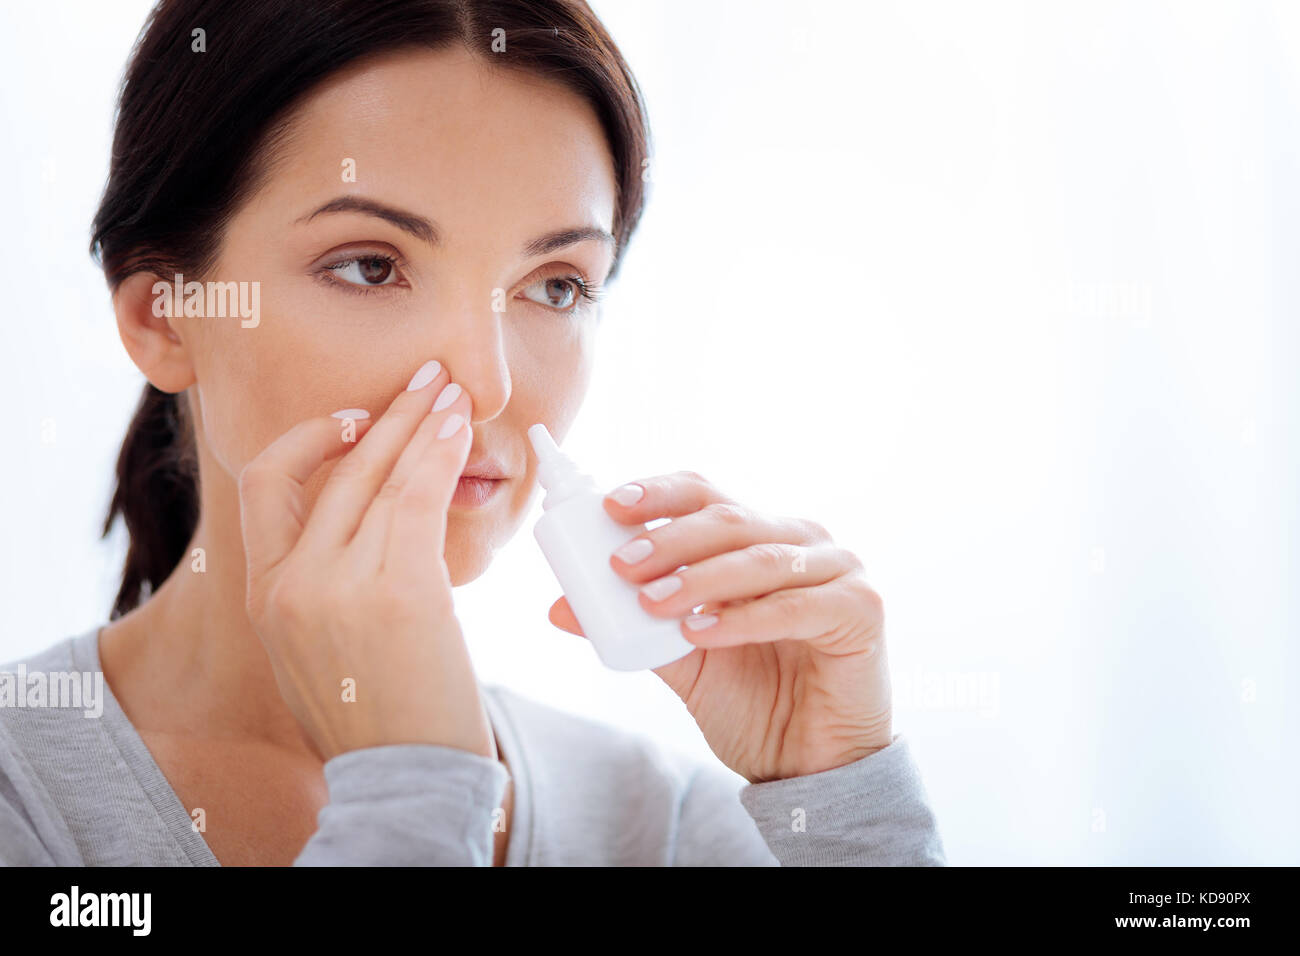 Attentive woman using special nasal drops Stock Photo